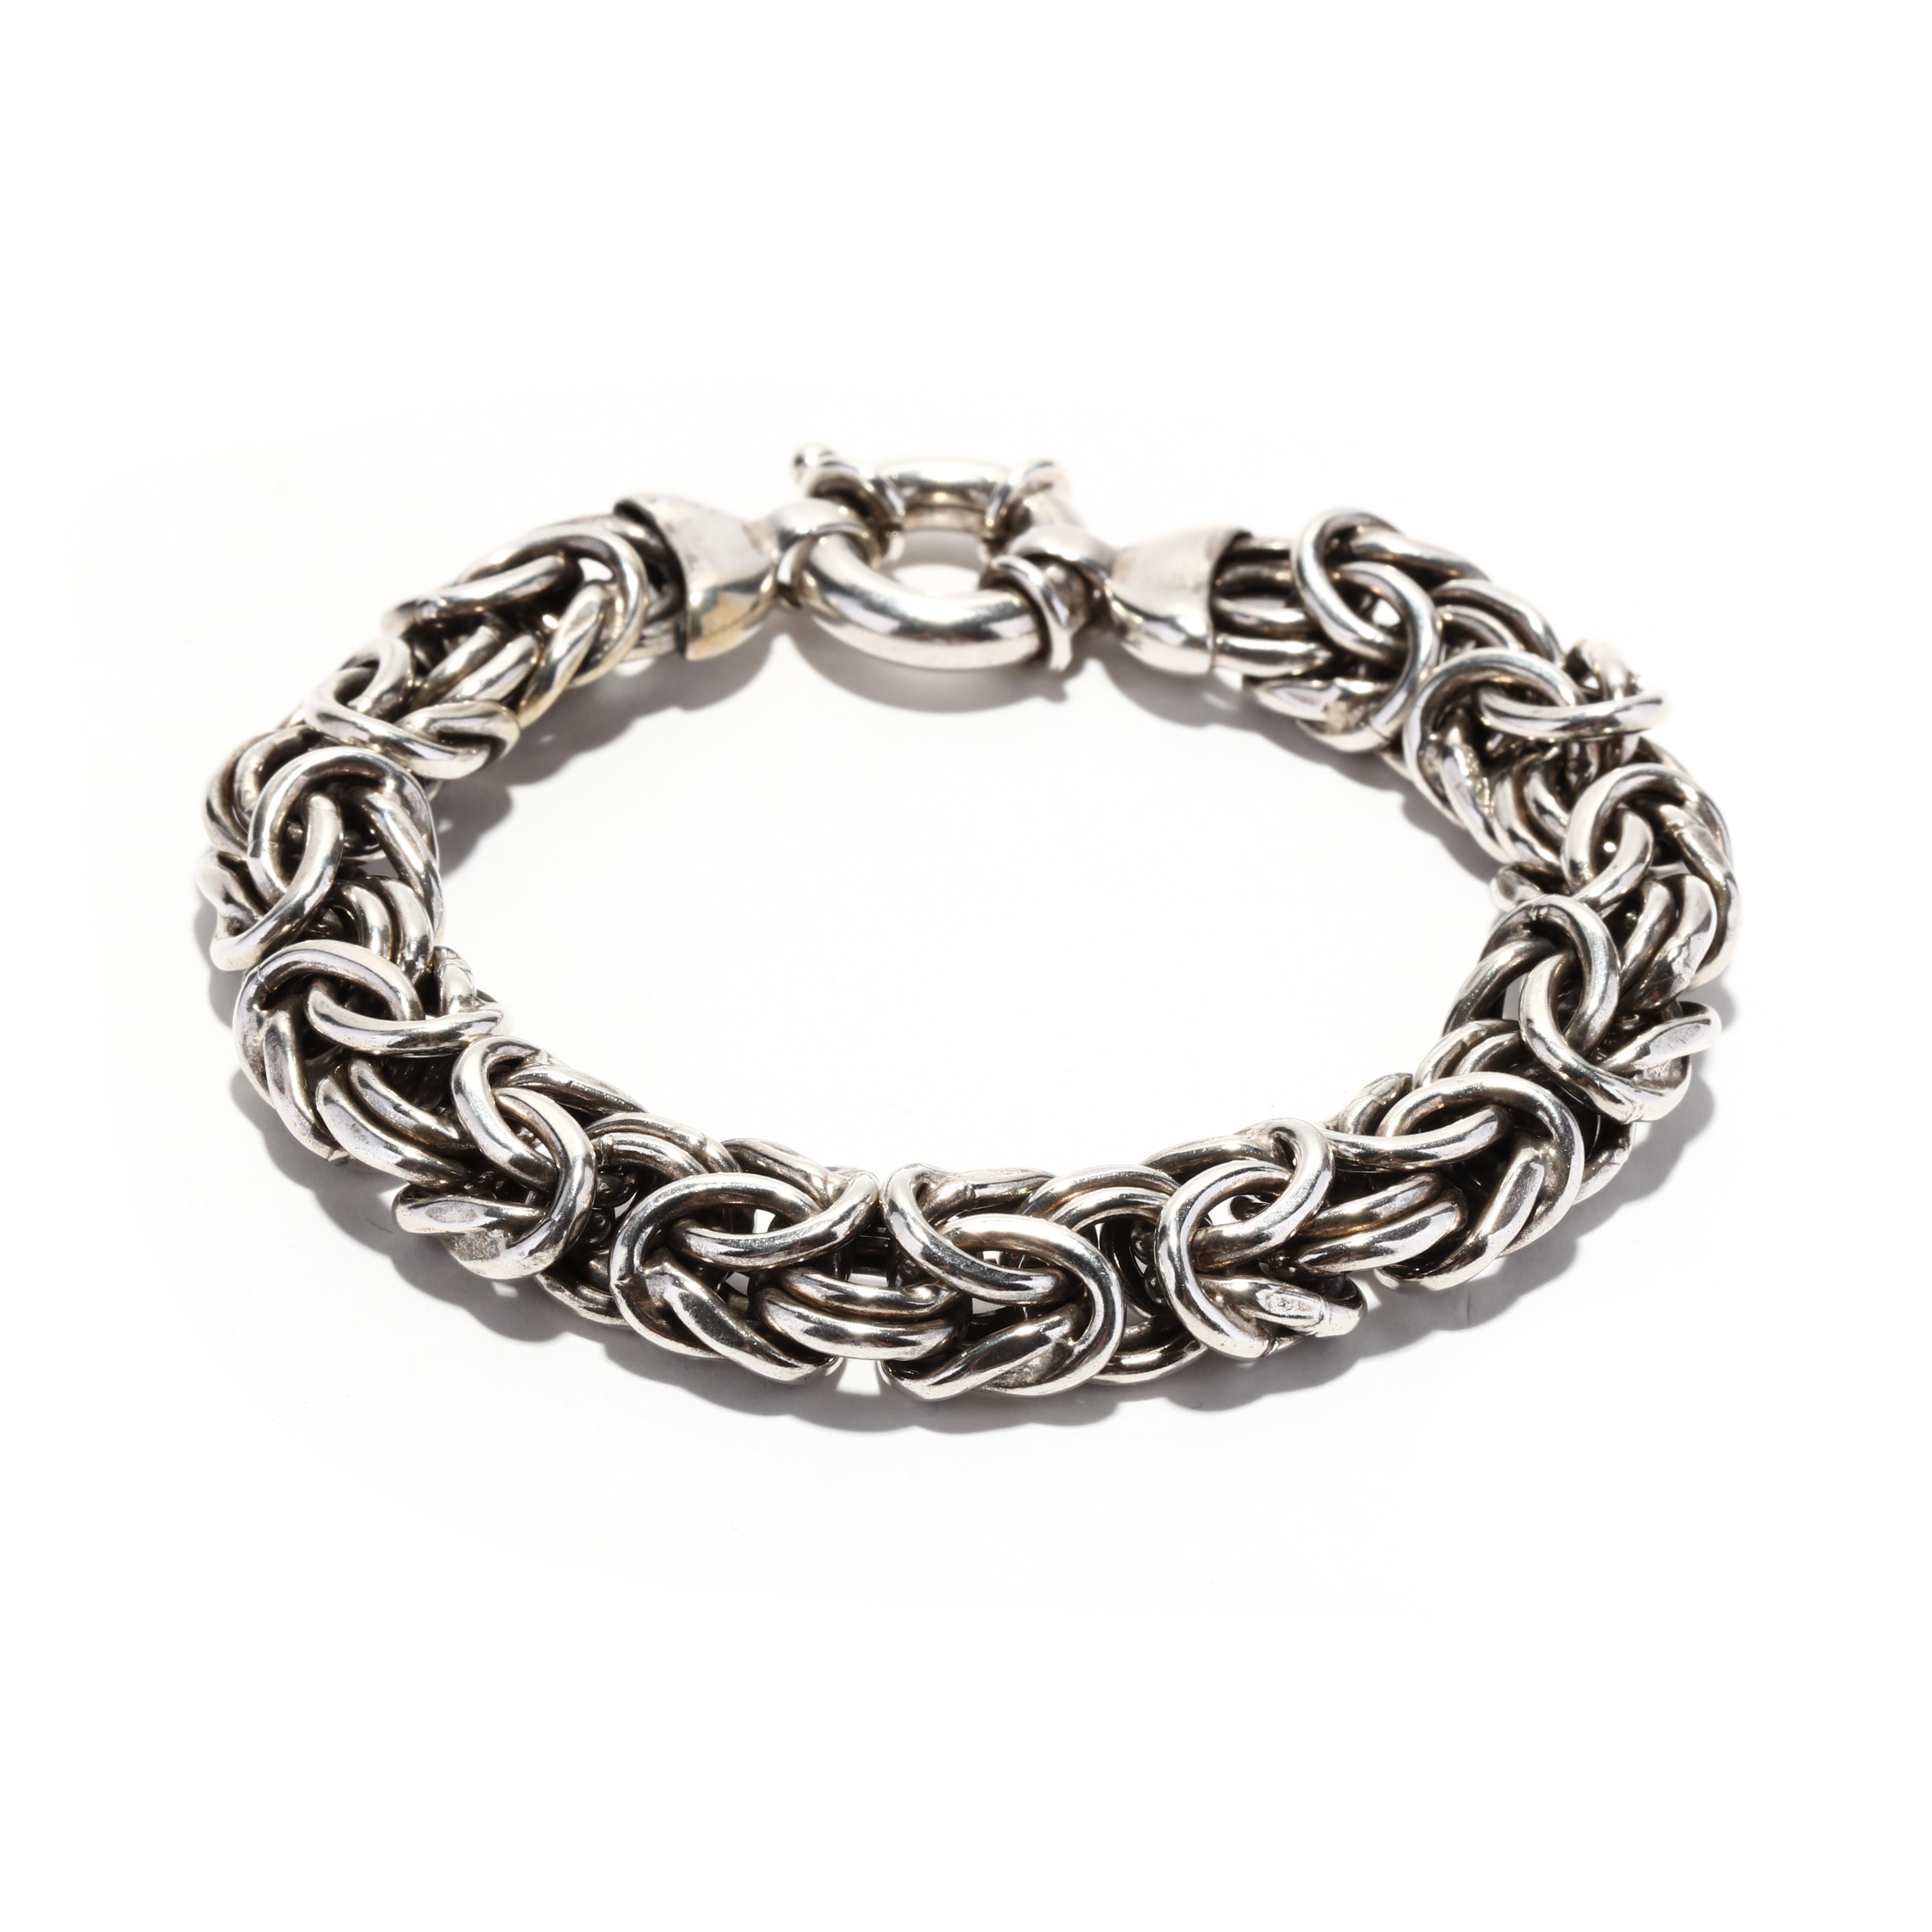 A vintage sterling silver wide byzantine link bracelet. This wide silver bracelet features a woven byzantine link with an oversized spring ring clasp.

Length: 7.25 in.

Width: 7/16 in.

Weight: 21.9 dwts. / 34 grams

Stamps: 925 ITALY

Ring Sizings